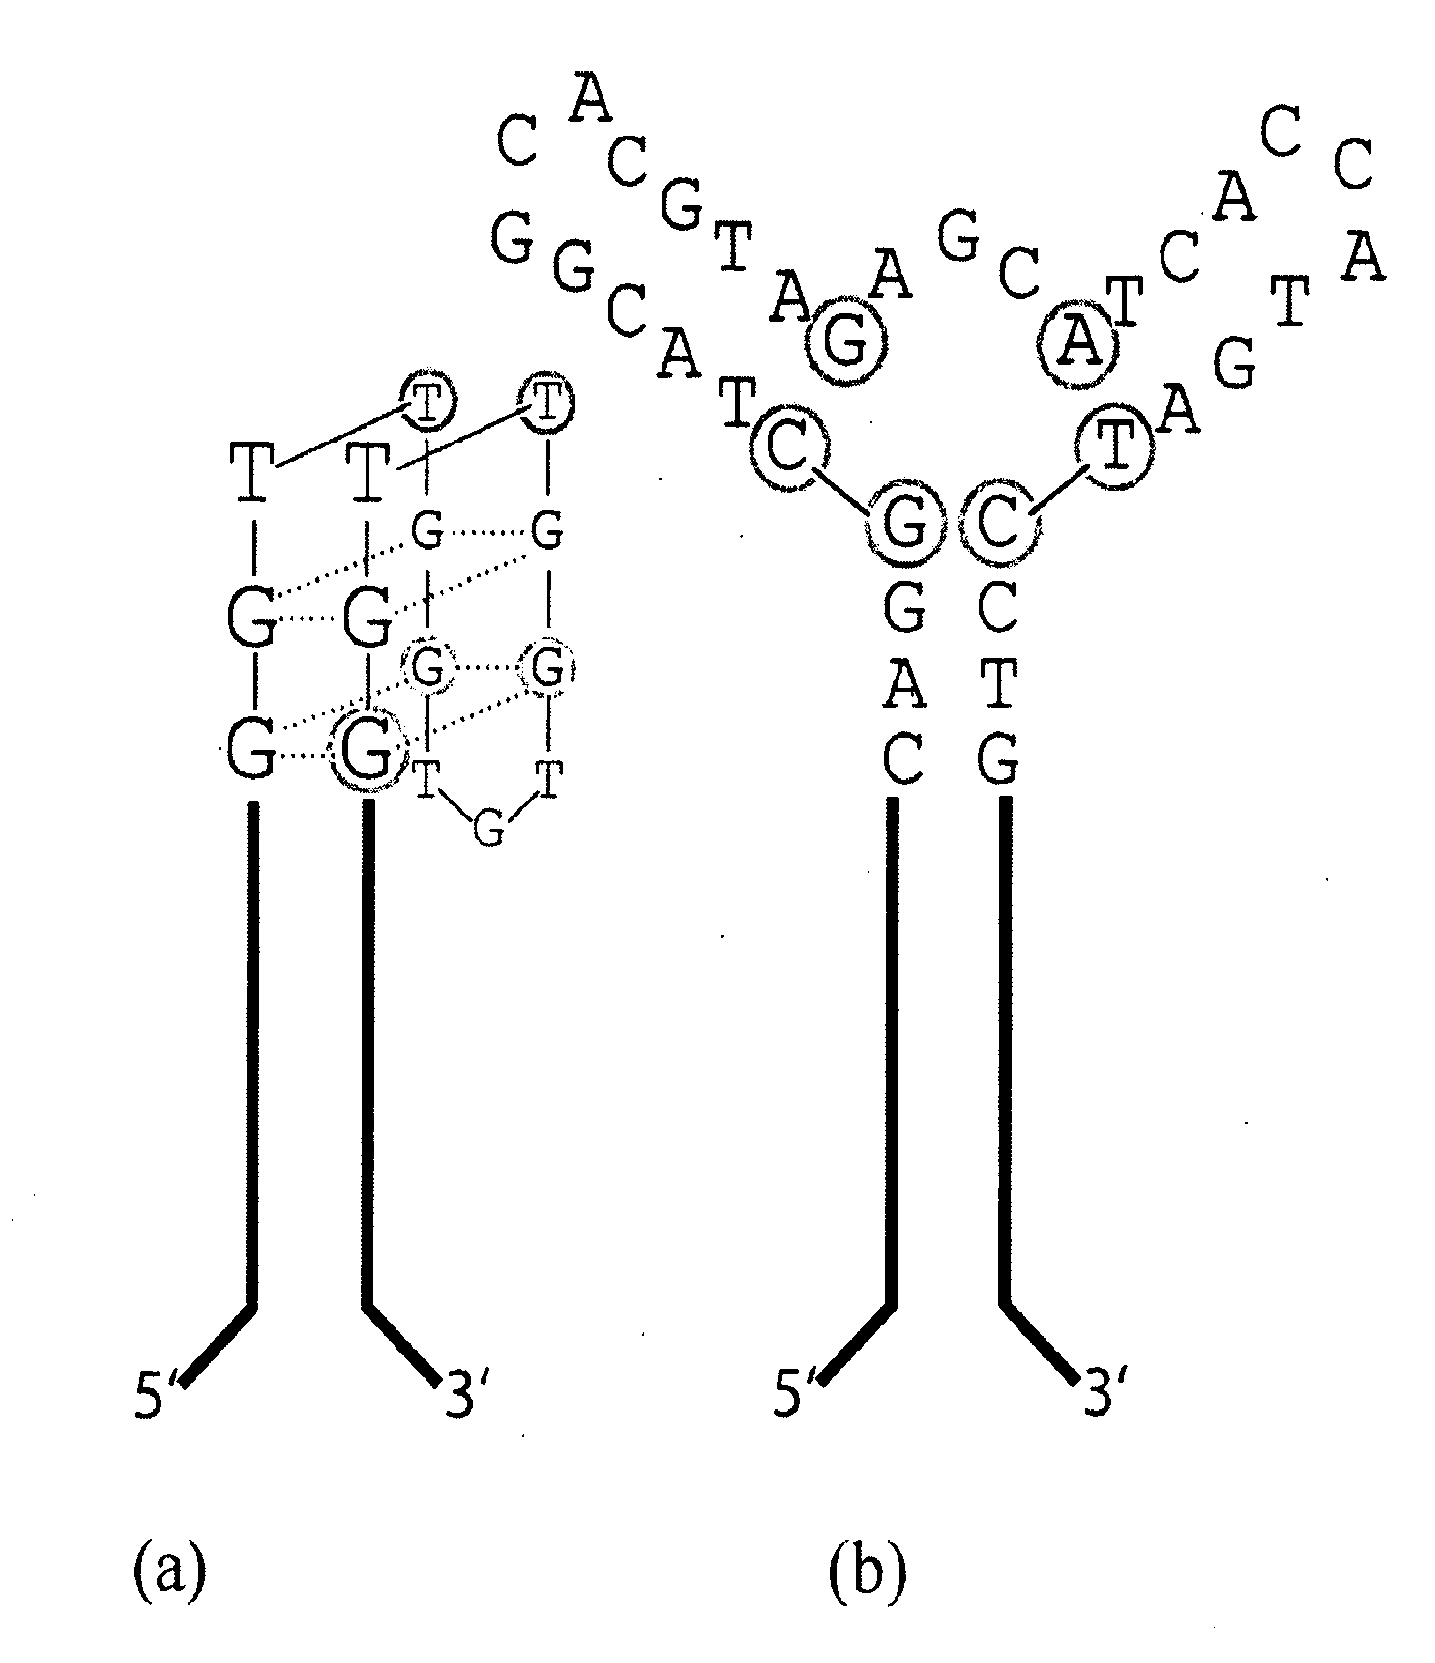 Direct selection of structurally defined aptamers